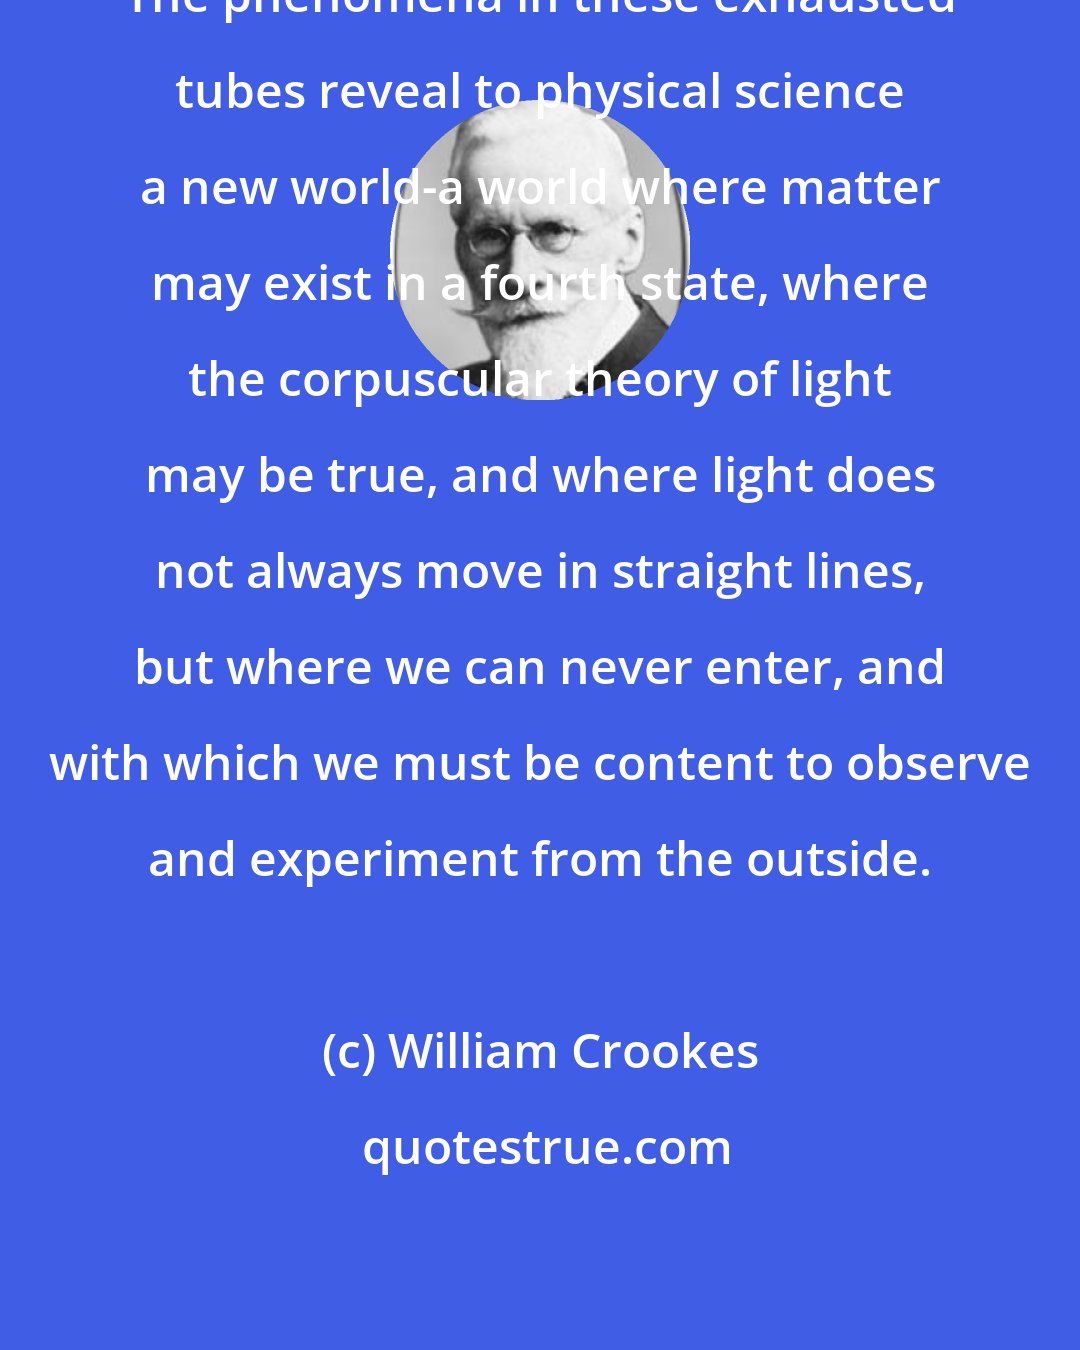 William Crookes: The phenomena in these exhausted tubes reveal to physical science a new world-a world where matter may exist in a fourth state, where the corpuscular theory of light may be true, and where light does not always move in straight lines, but where we can never enter, and with which we must be content to observe and experiment from the outside.